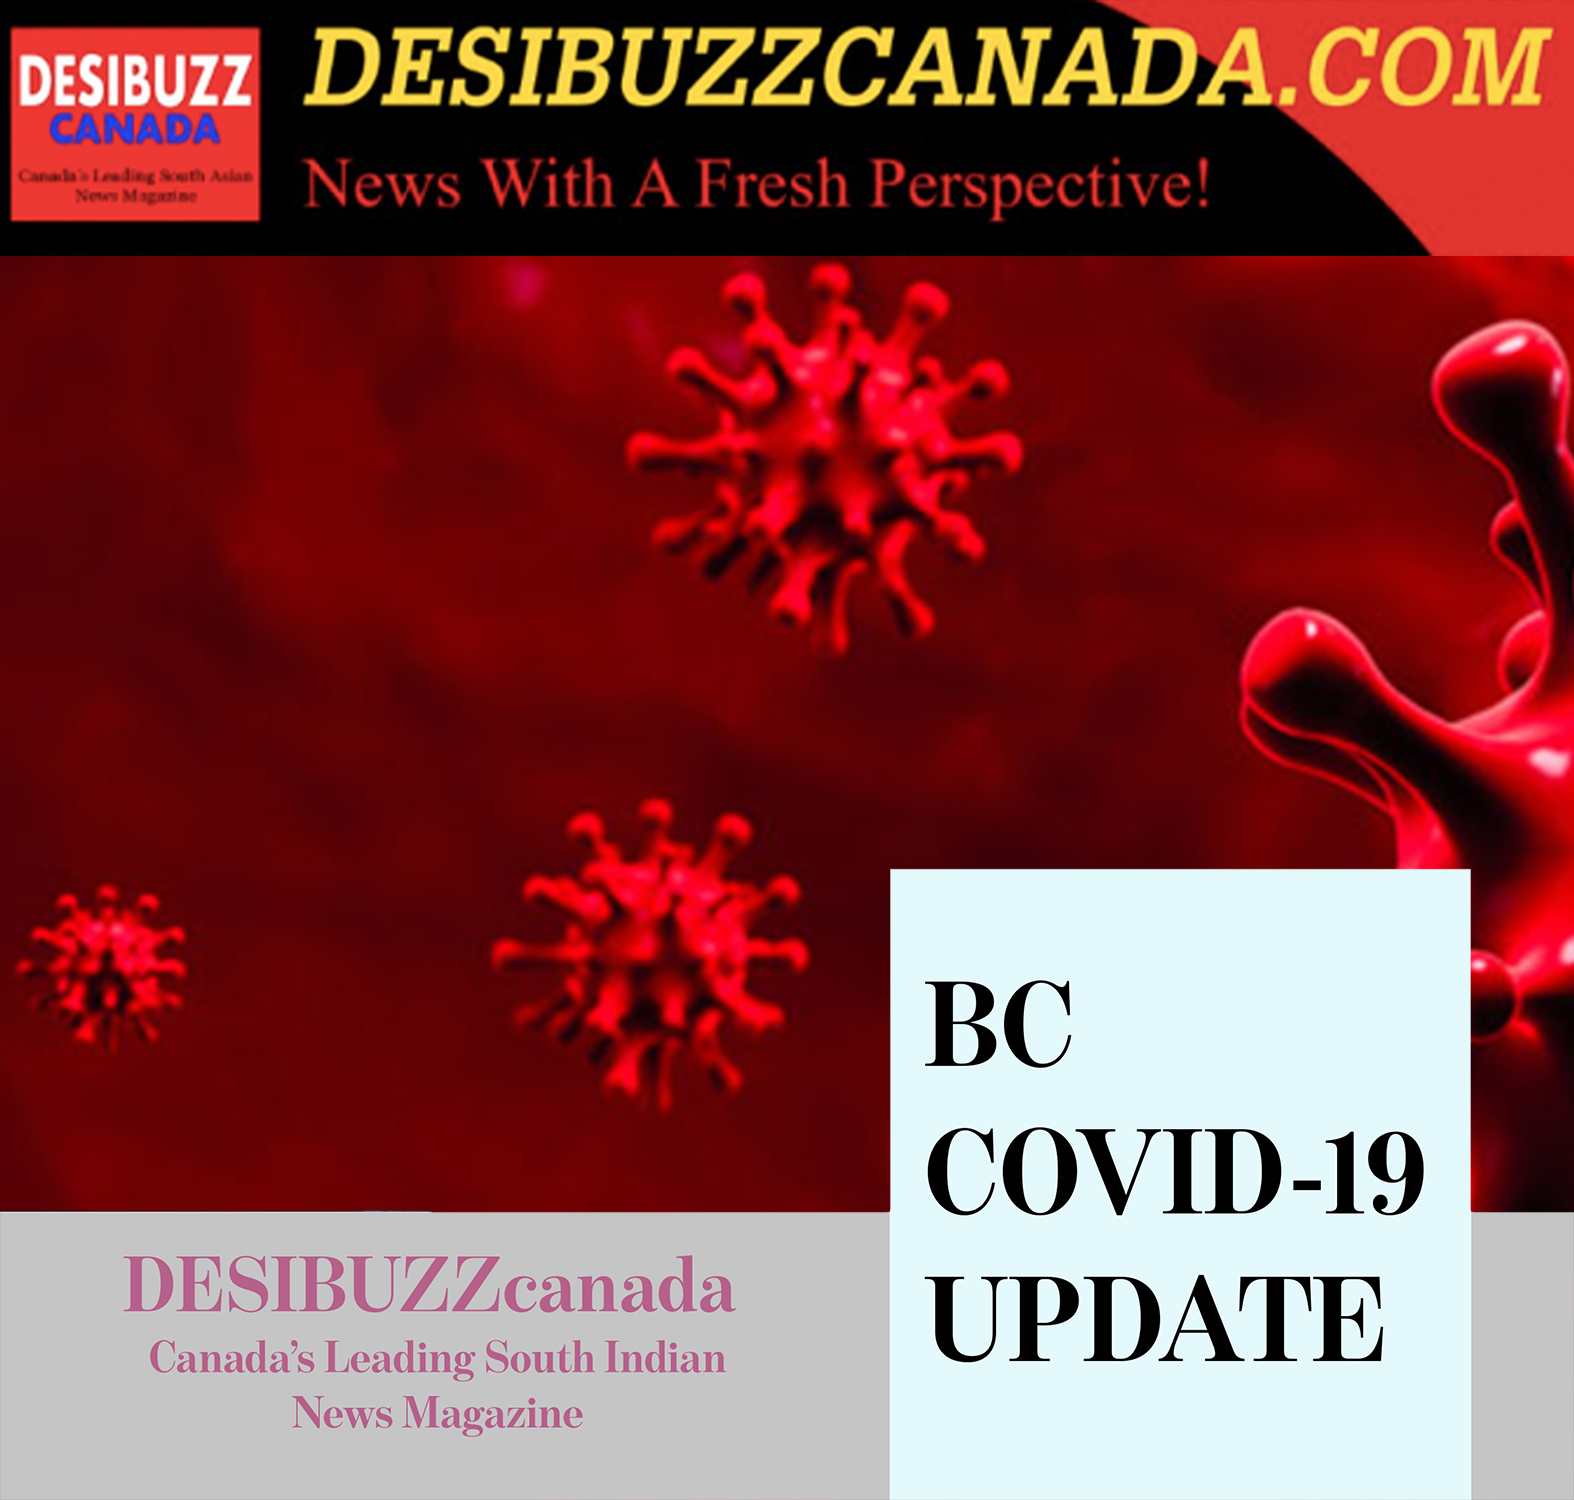 BC COVID-19 UPDATE: Over 200 Cases And One Death Reported Tuesday